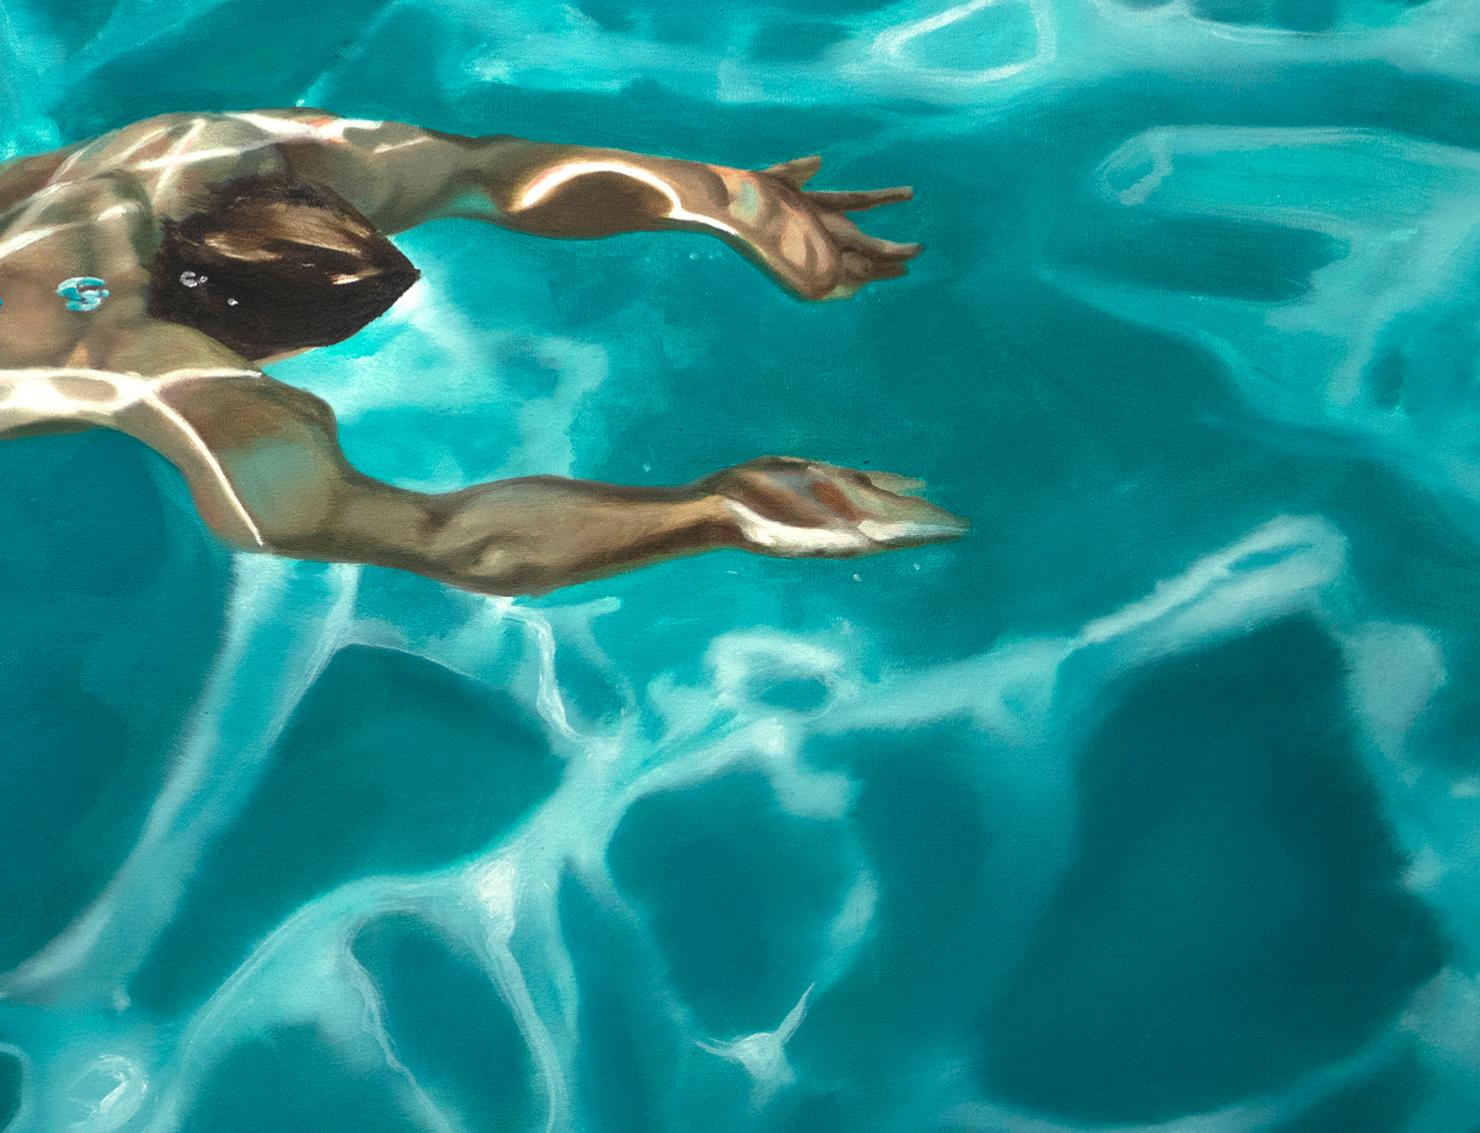 QUARANTINE IN BLUE, man underwater, swimming, pool, blue, photo-realism - Contemporary Painting by Eric Zener